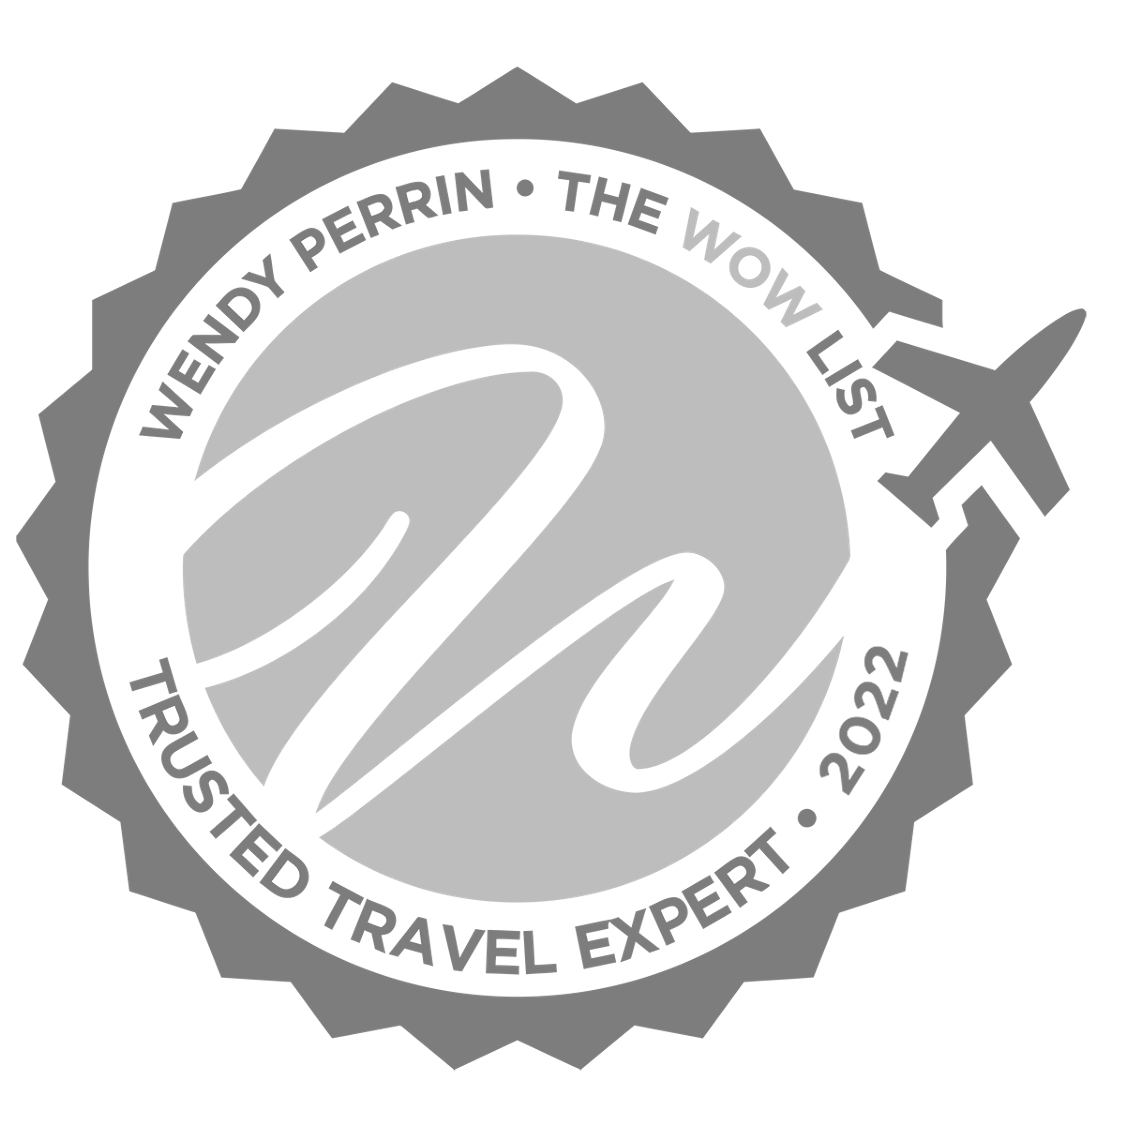 Wendy Perrin Trusted Travel Experts Australia New Zealand